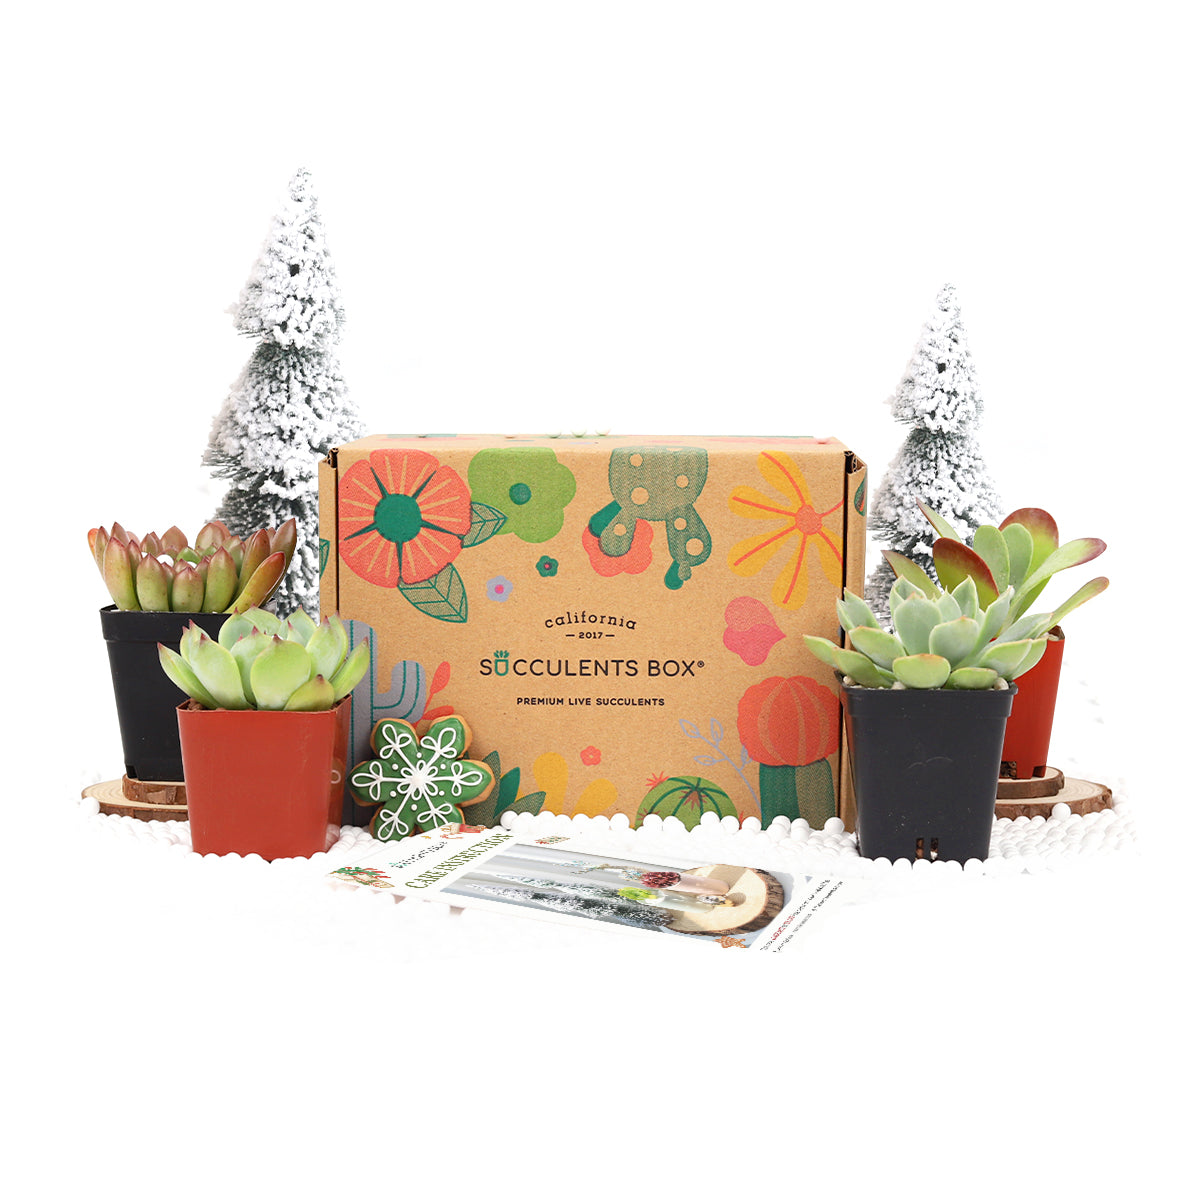 plant box subscription, Air plants for Sale, Types of air plants, Succulents Shop in California, Succulents and Cactus Plants, Air plant box for sale